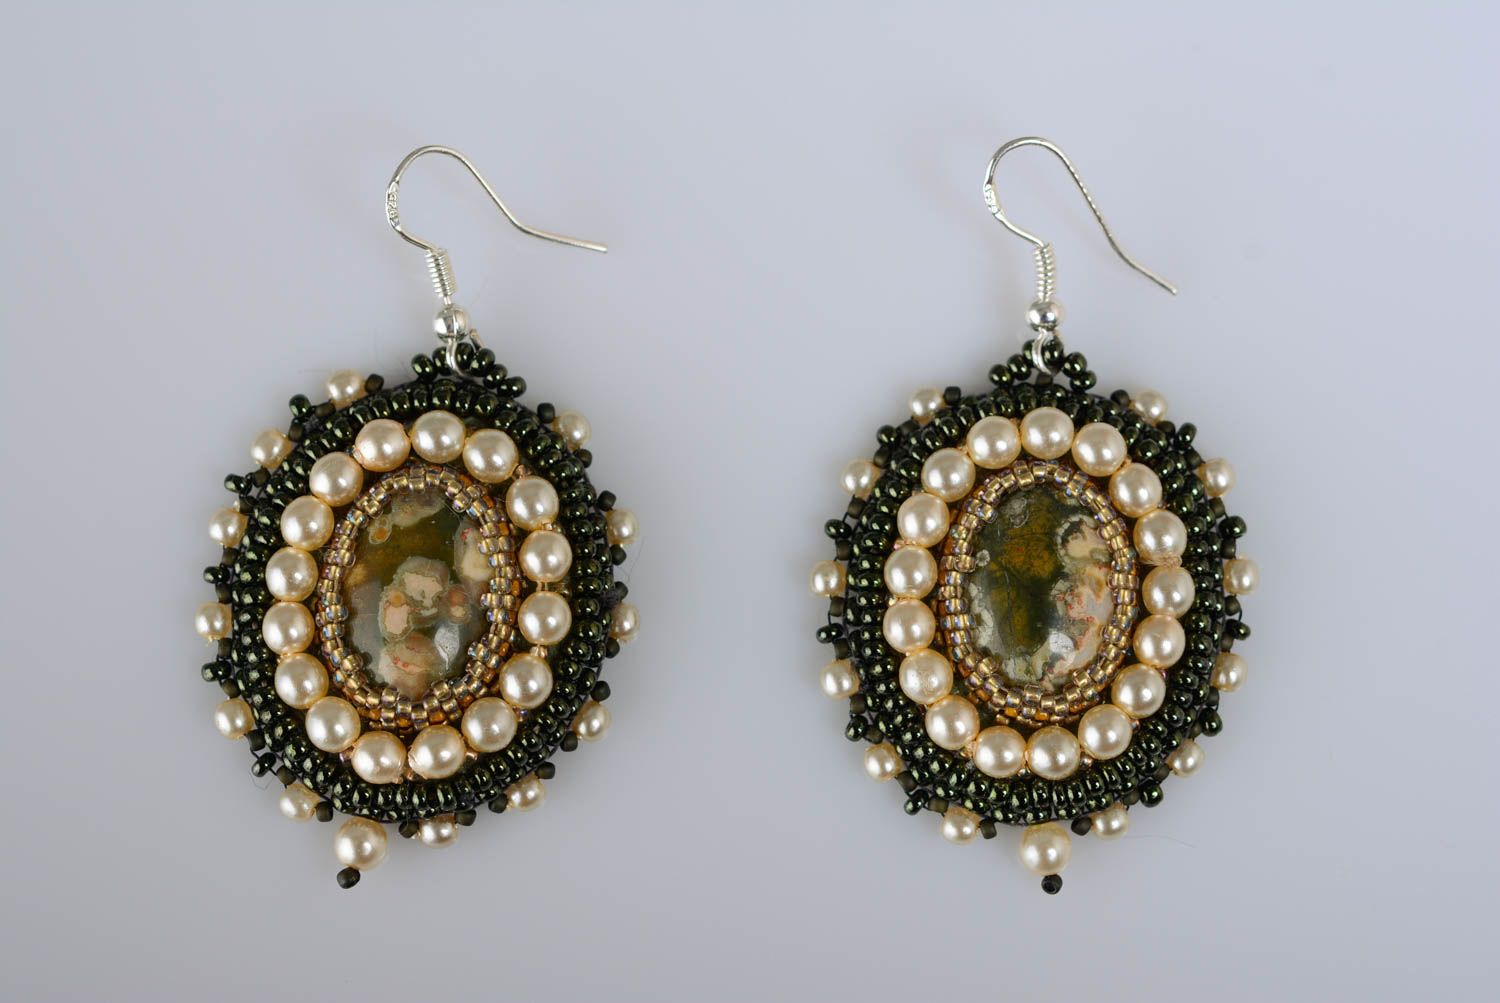 Handmade oval shaped festive dangling earrings embroidered with beads and jasper photo 1